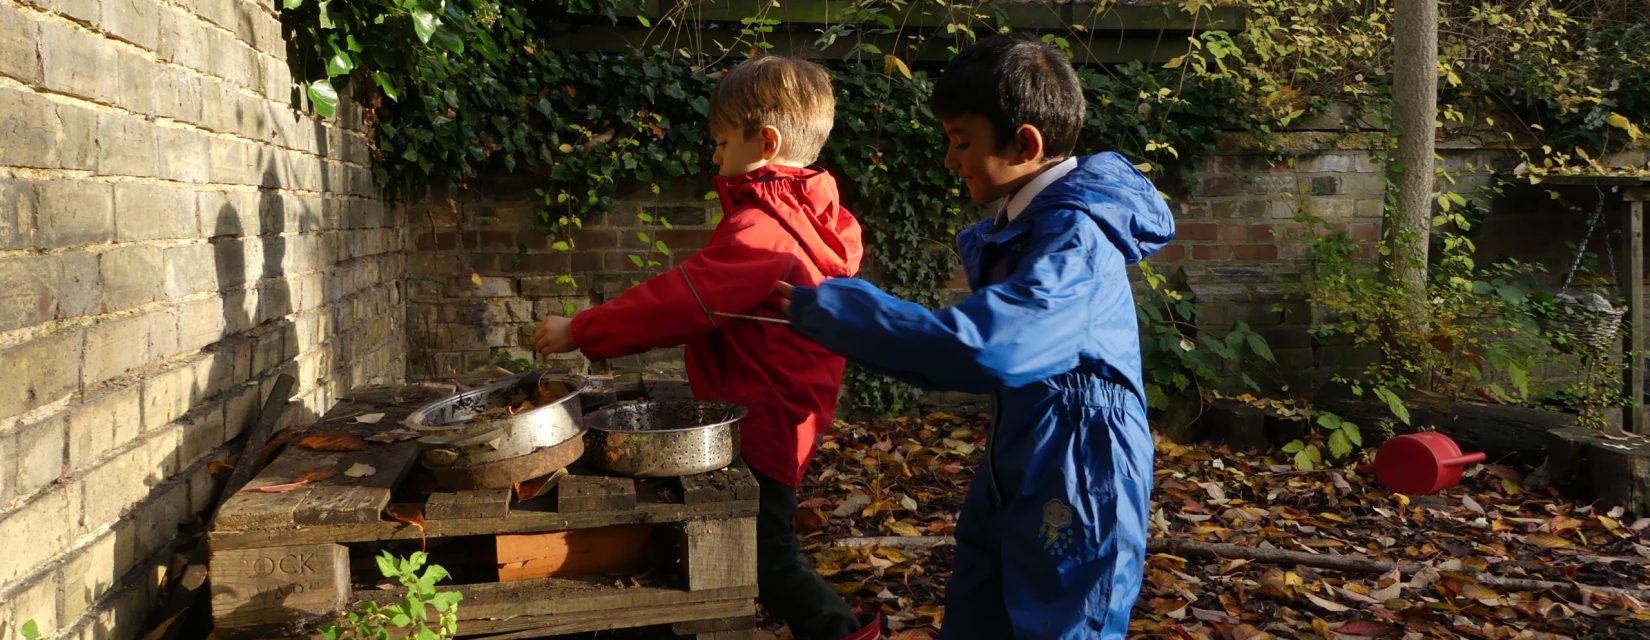 children with pots and pans outside